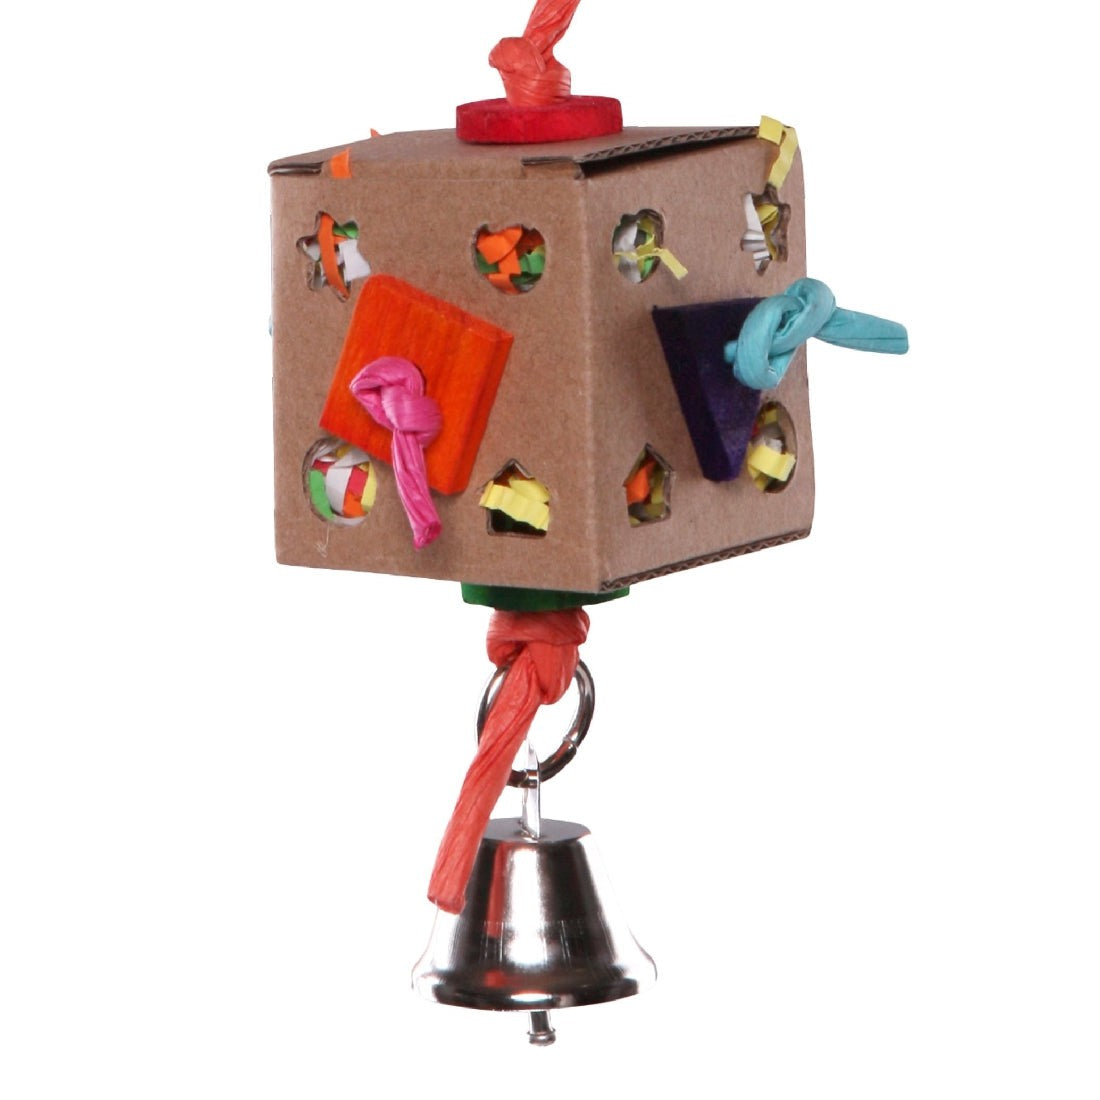 Cardboard cube bird toy with colorful knots and attached bell.